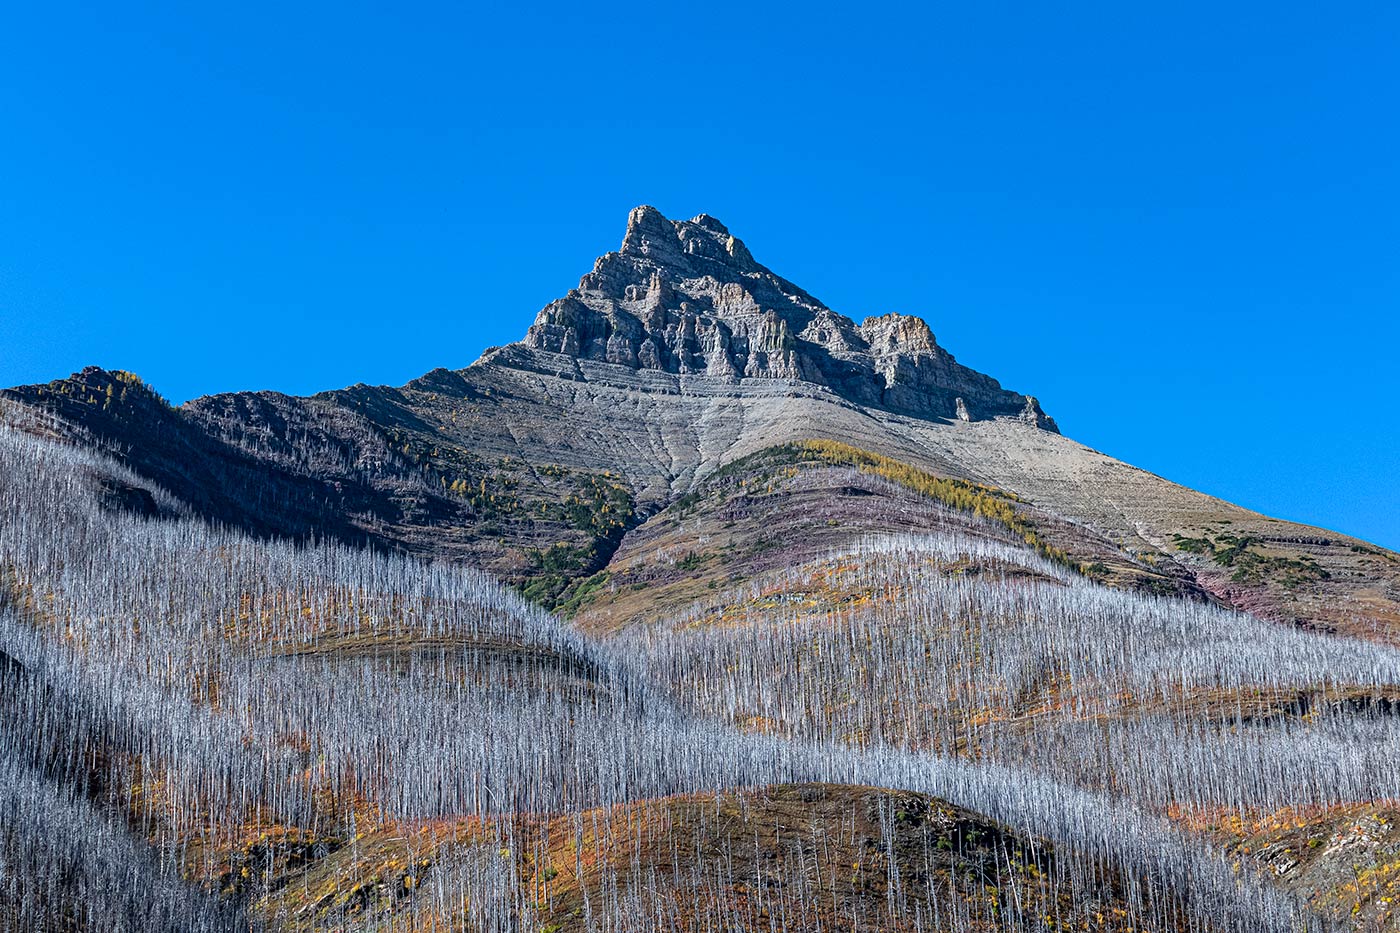 North face of Mount Blakistan and high elevation larch trees in fall